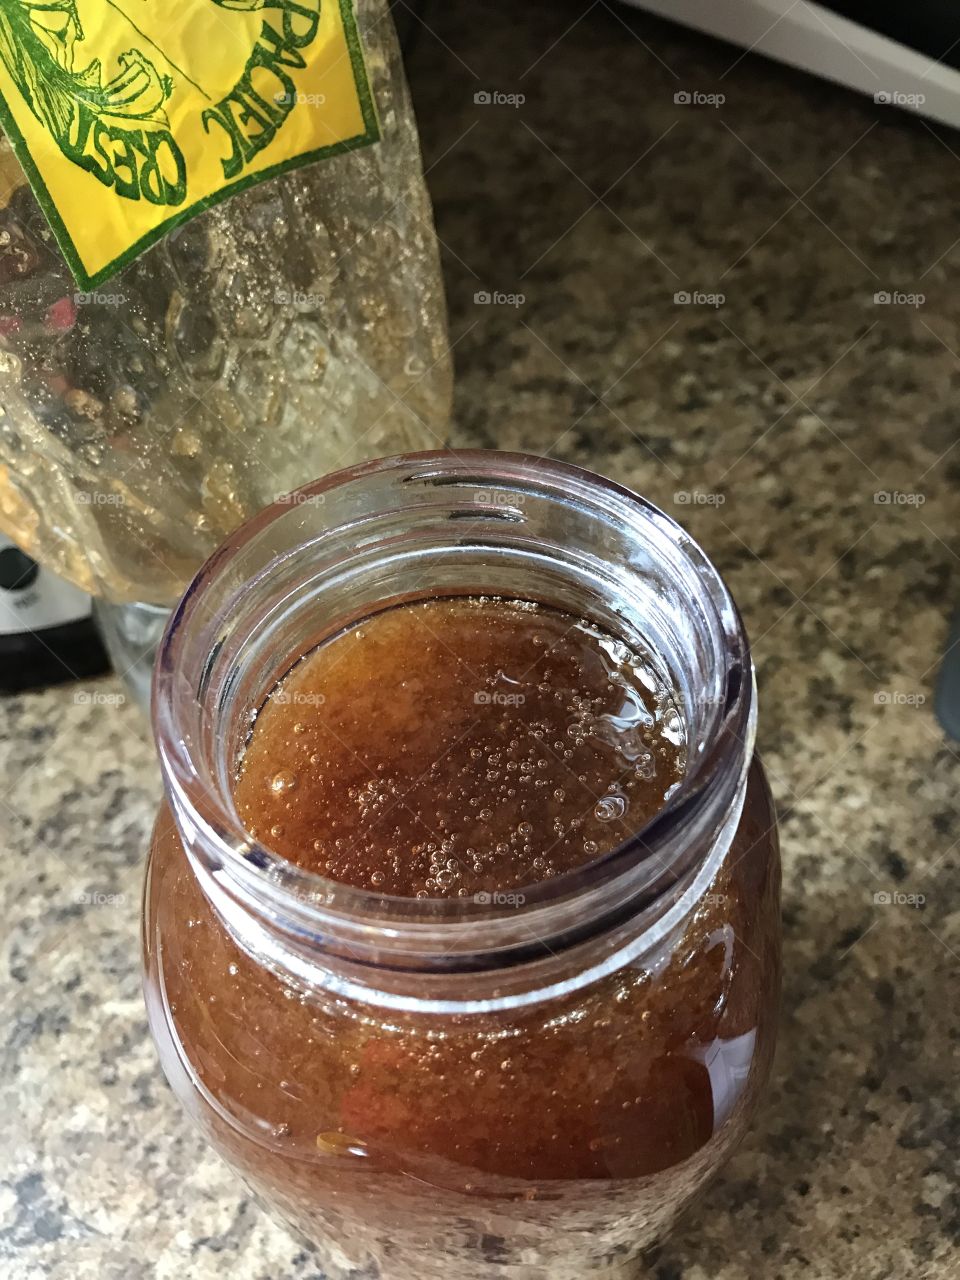 “Miel de abeja” untreated, natural, raw honey. I usually consume it to fight seasonal allergies. I am really not crazy about allergy medicine and its effects. So I tackle allergies with real honey which I get at my local apiary. #NoFilters